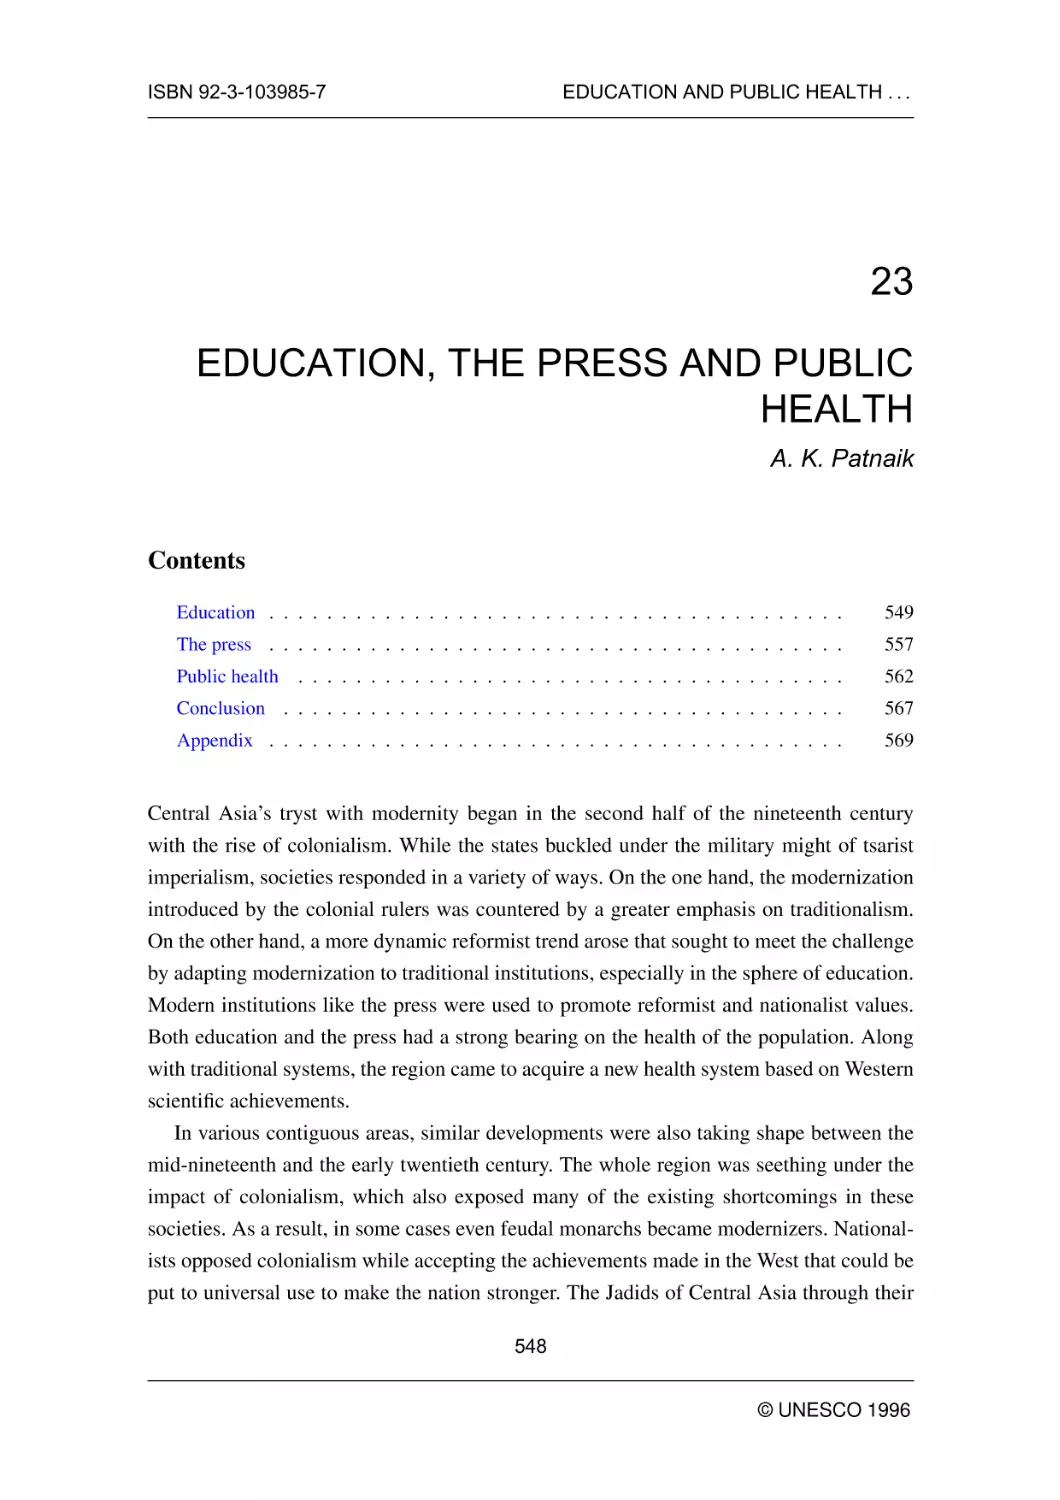 EDUCATION, THE PRESS AND PUBLIC HEALTH